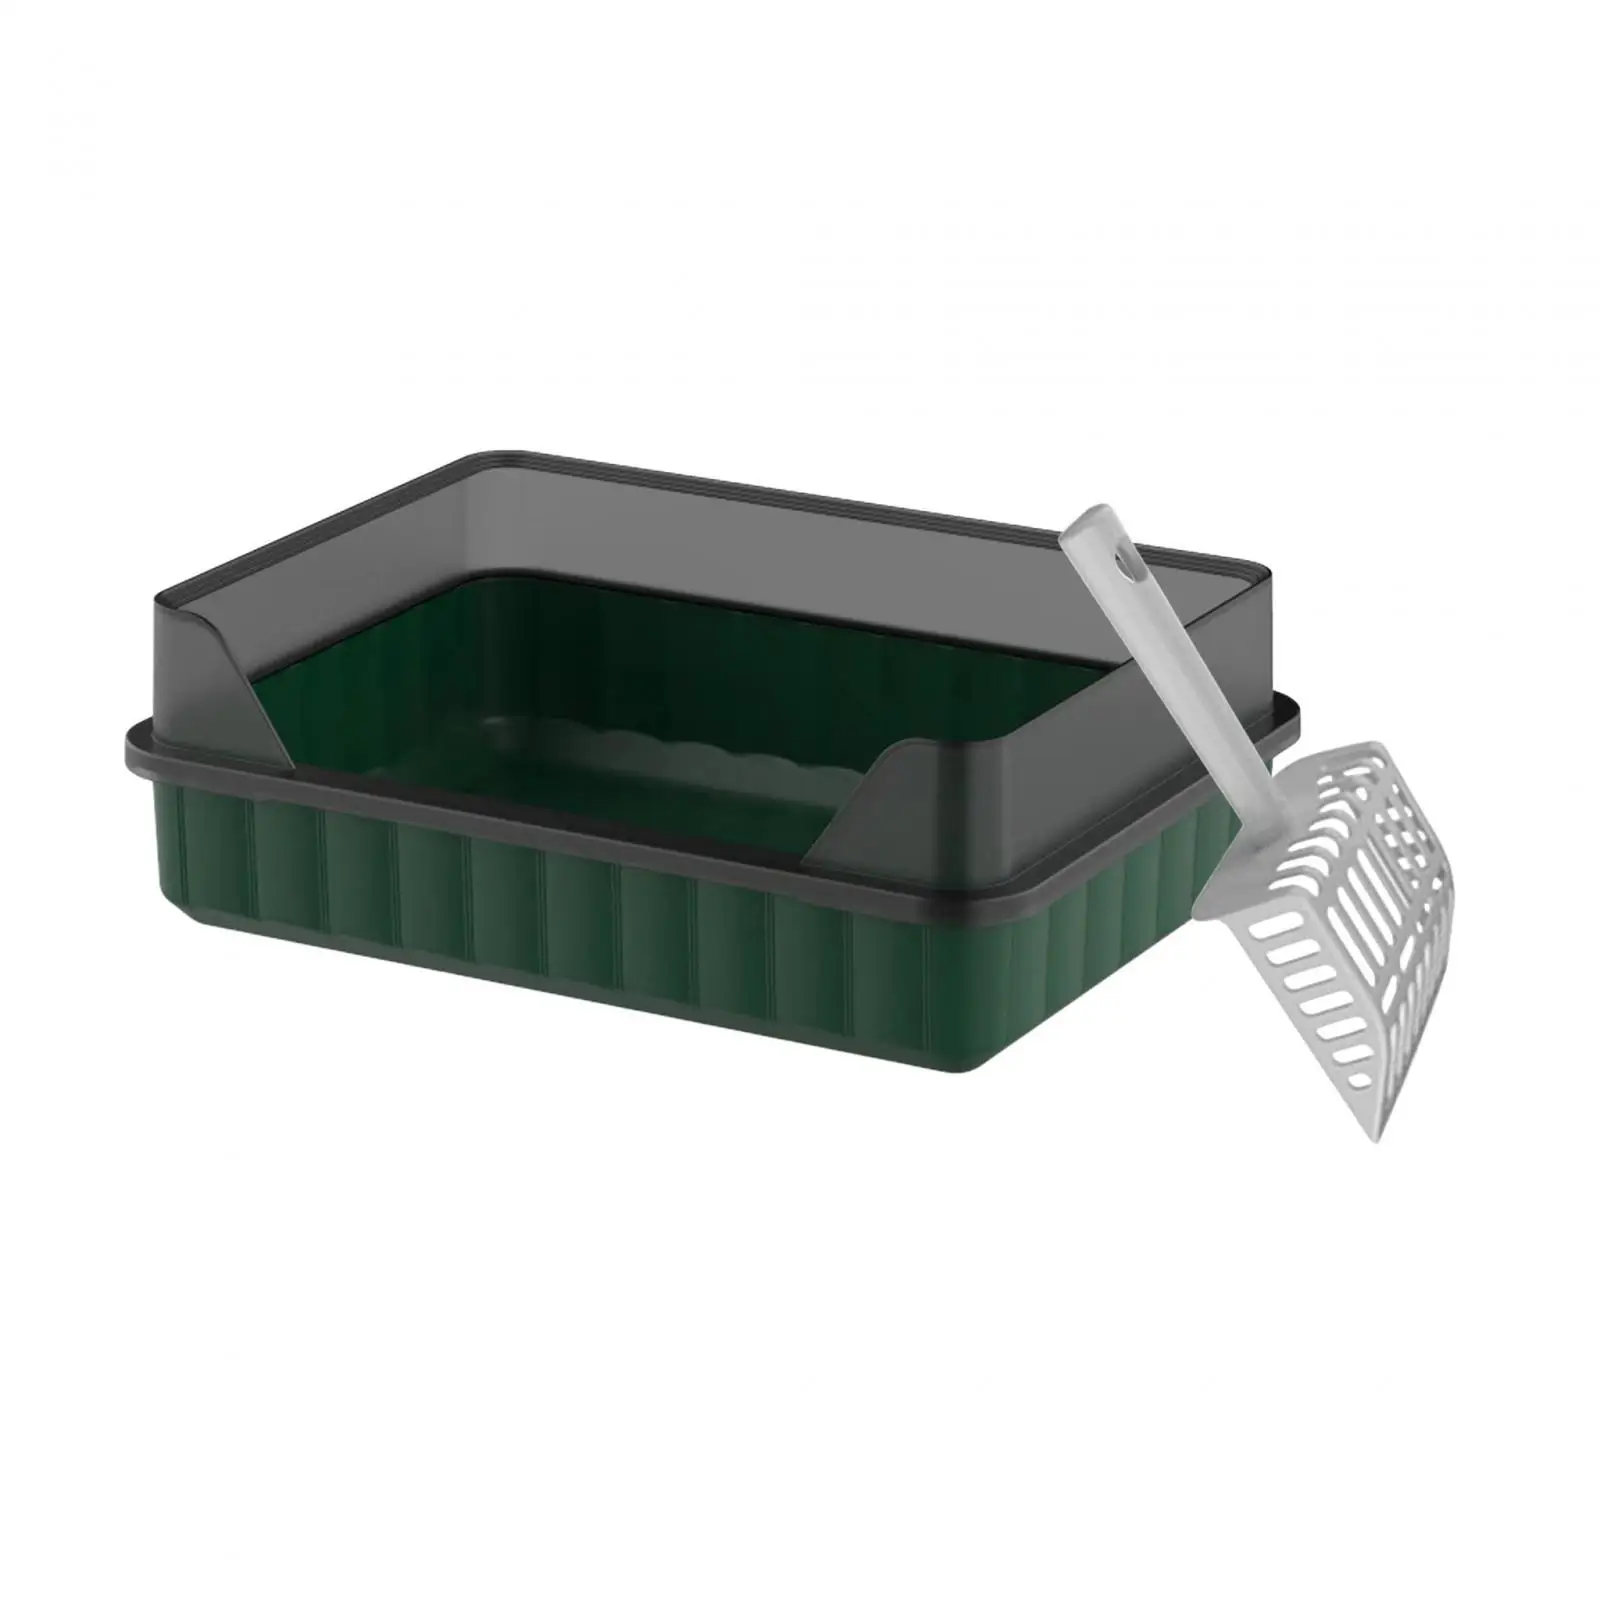 High Sided Cats Litter Box Splashproof Easy to Clean Litter Tray for Small Medium Cats Pets Rabbit Bunny Small Animals